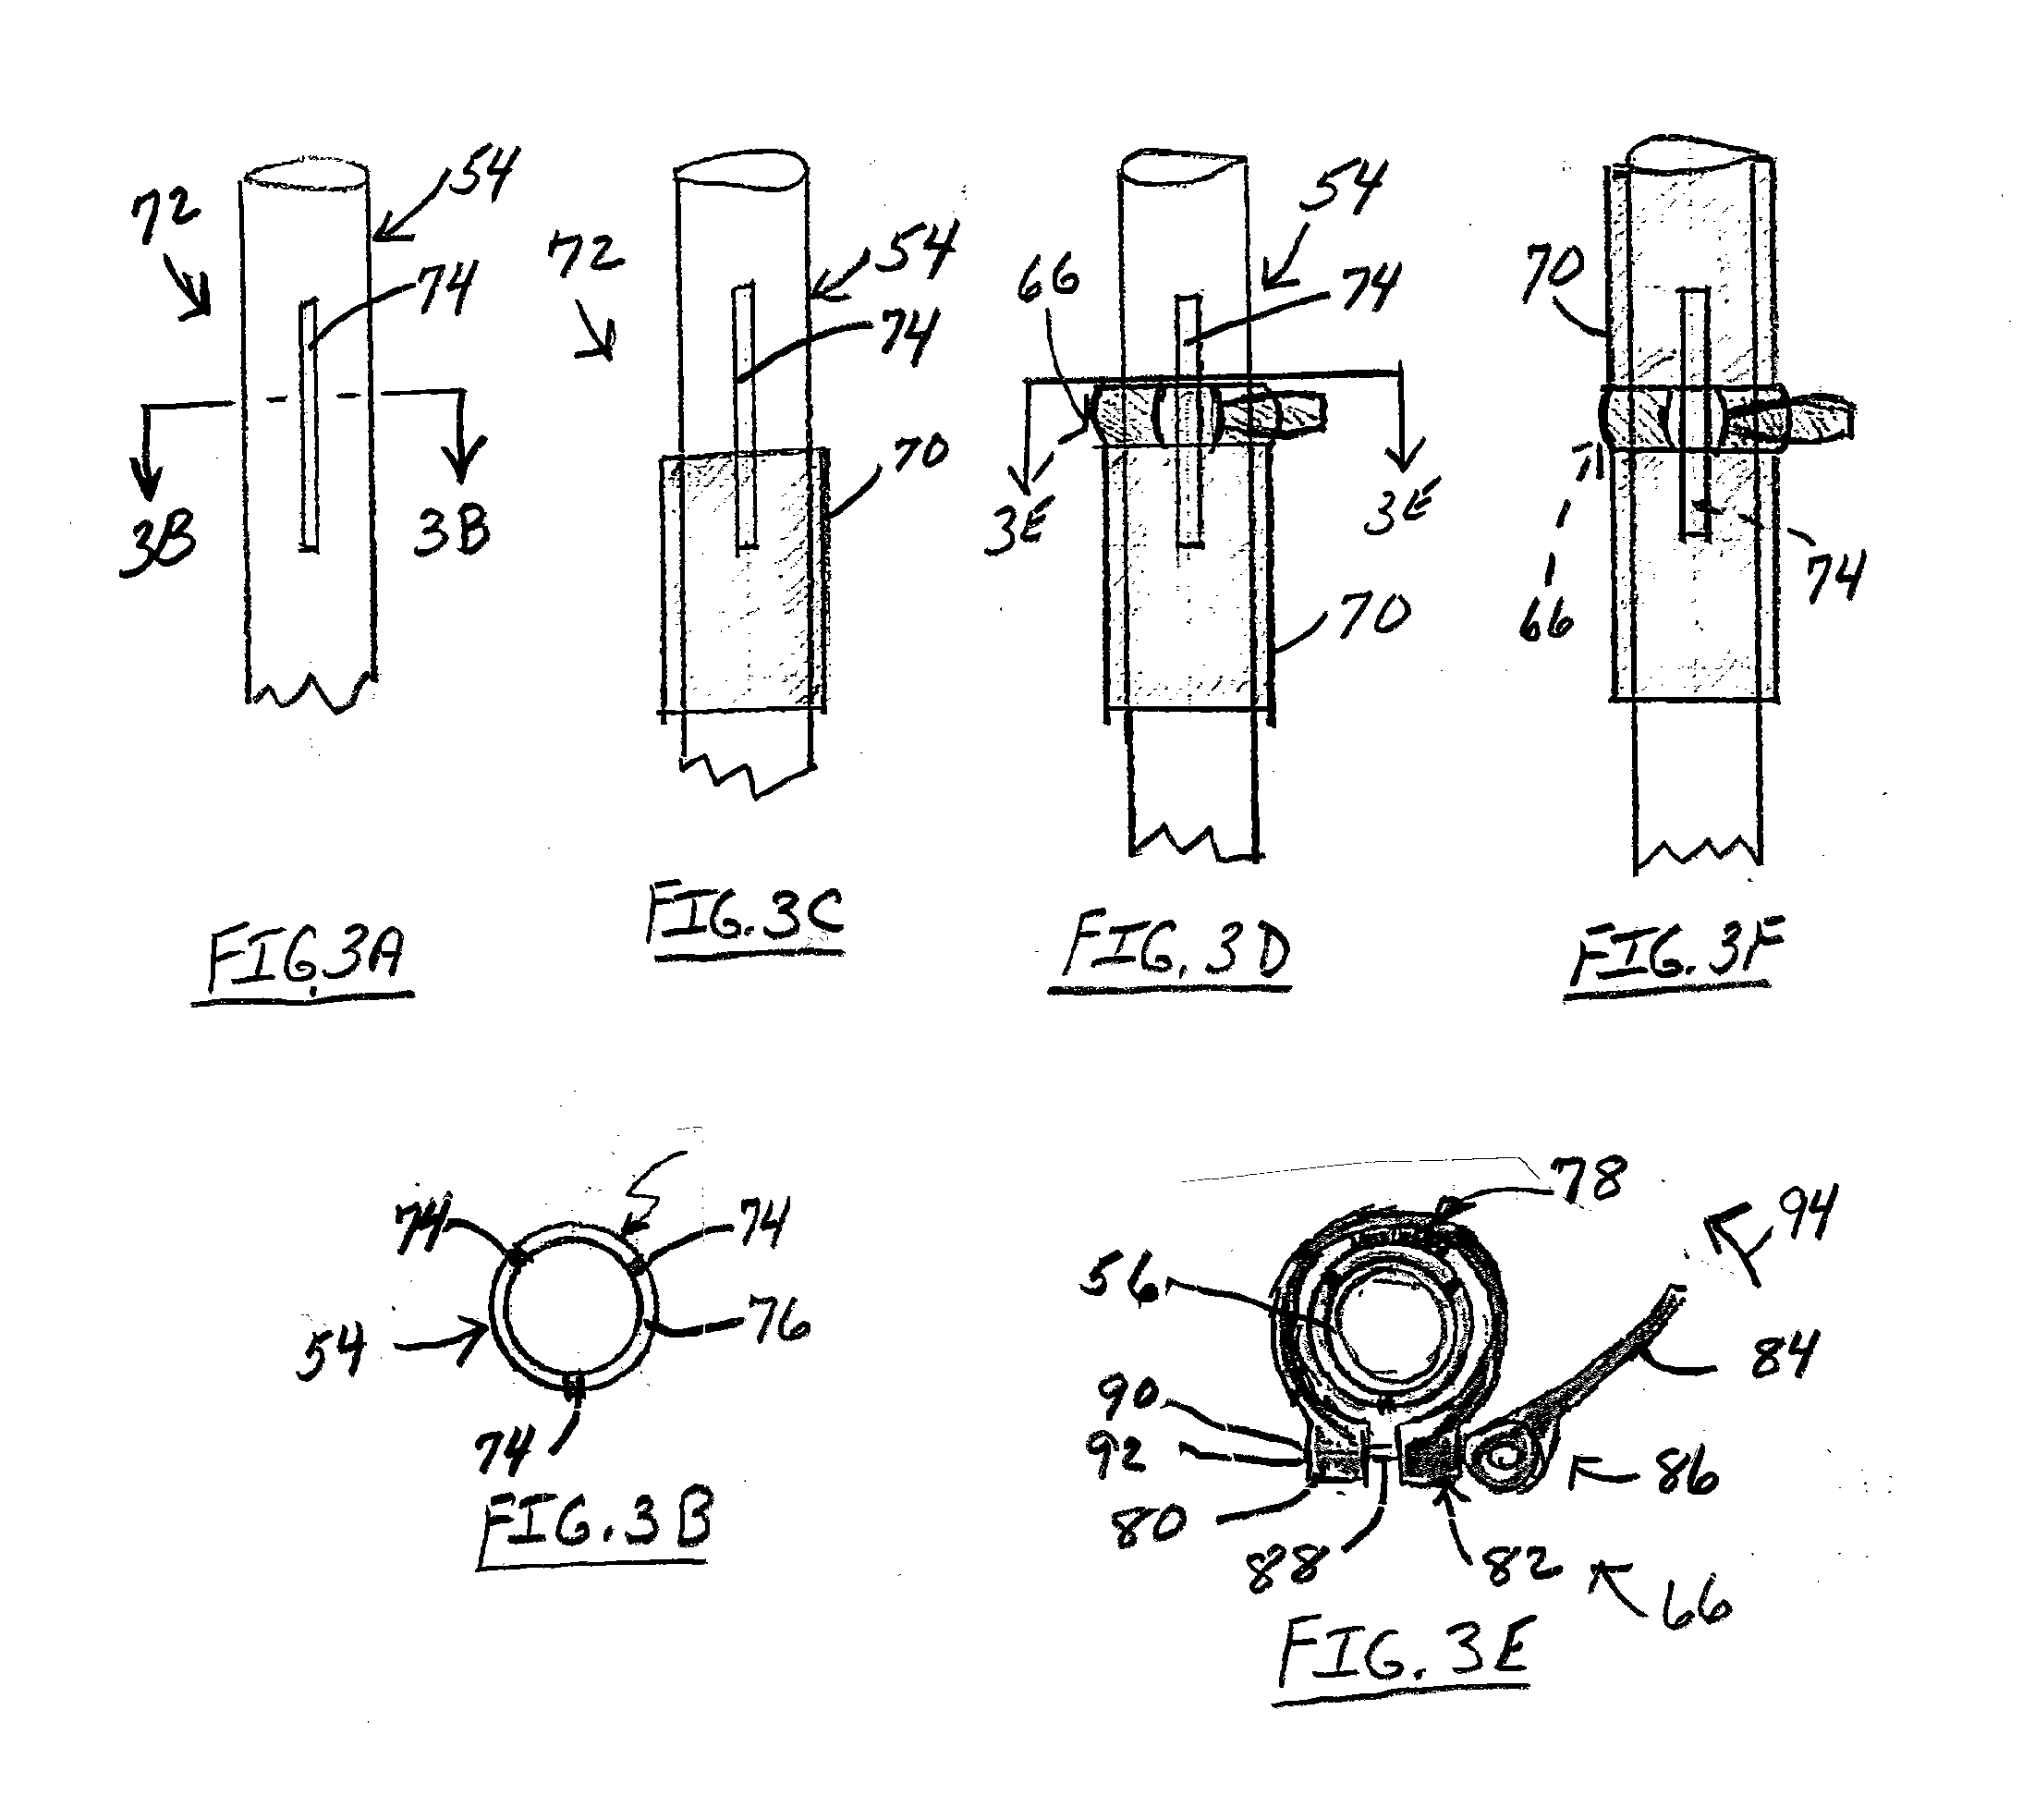 Apparatus and Method for Docking a Boat